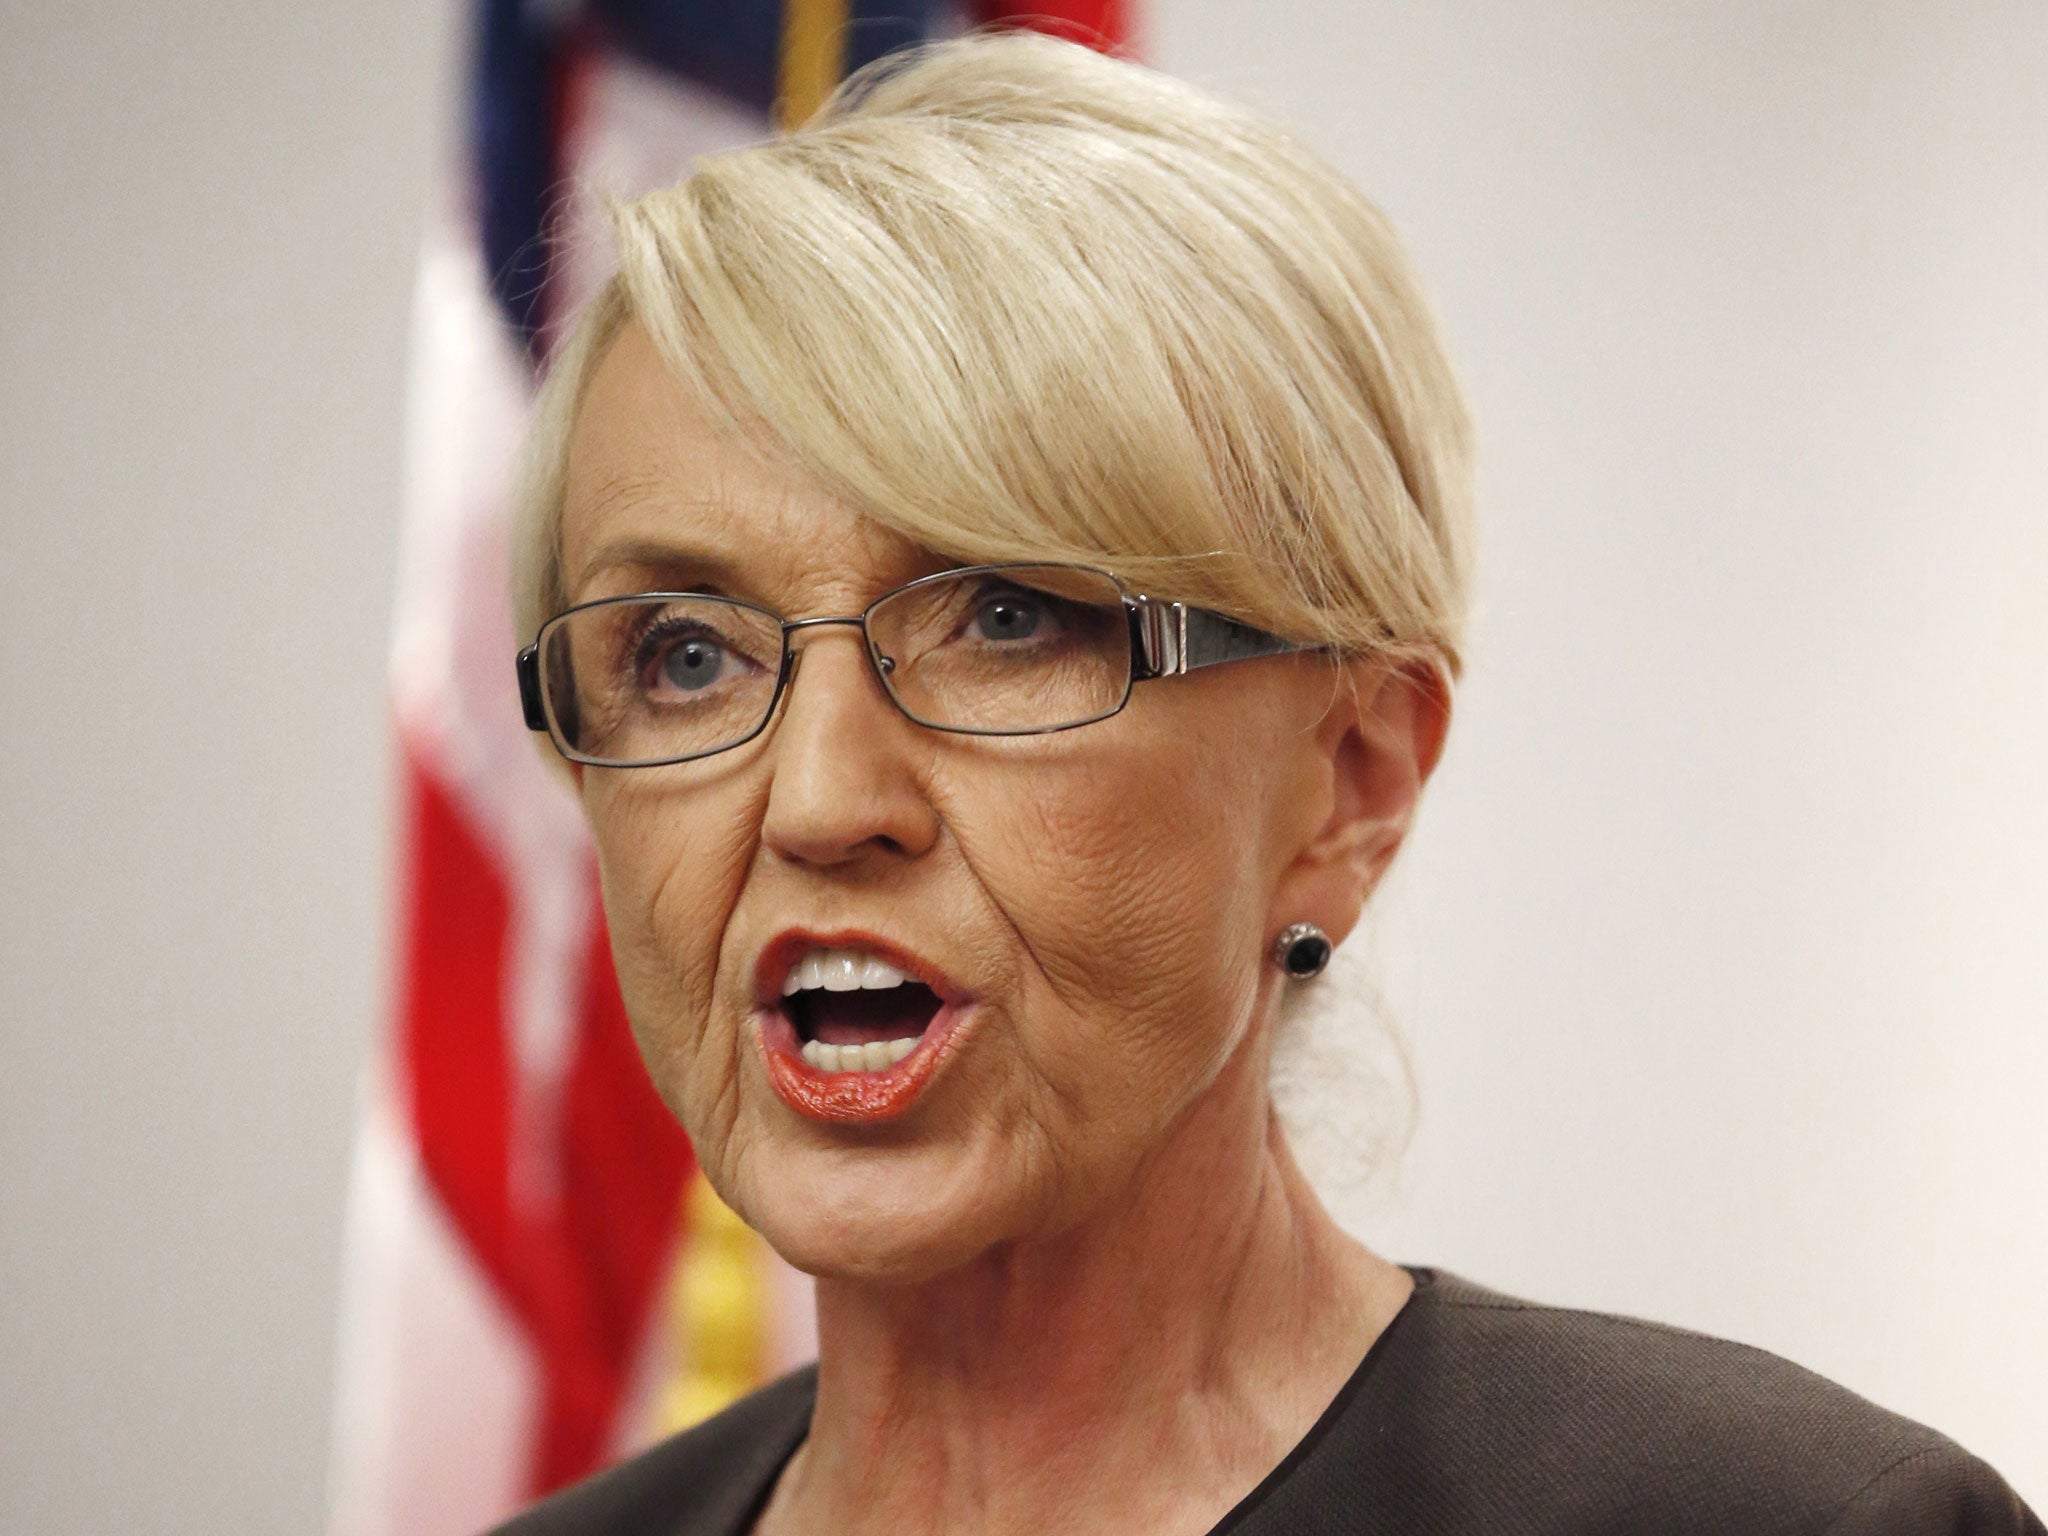 The Republican Governor of Arizona, Jan Brewer, said the bill did not 'address a specific or present concern related to religious liberty'